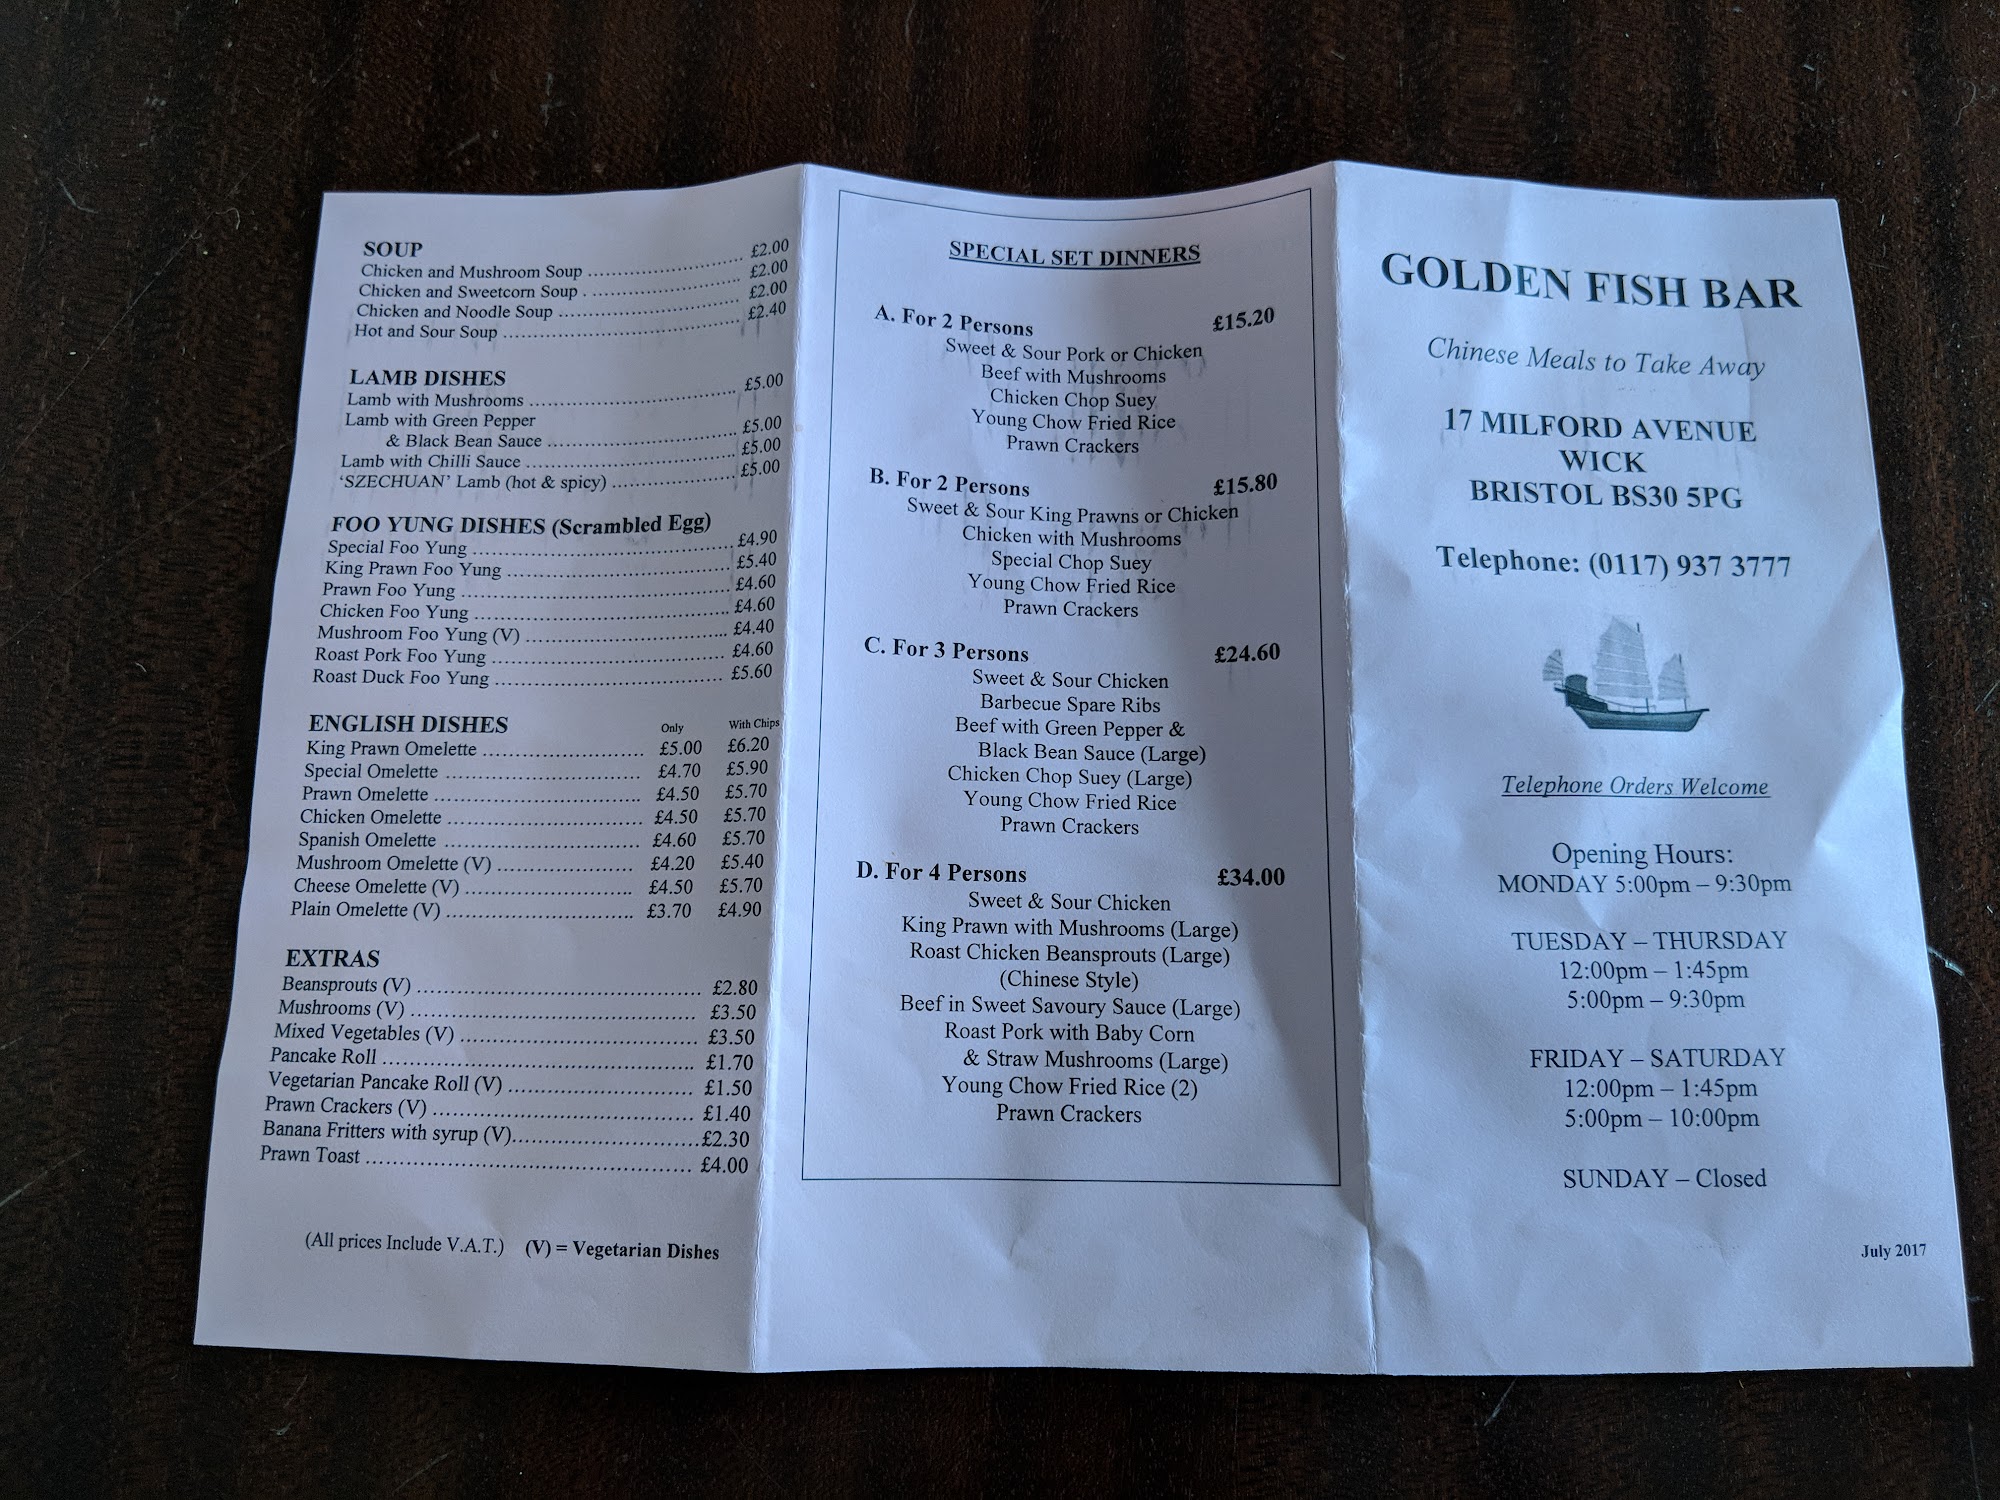 The Golden Fish Bar Two